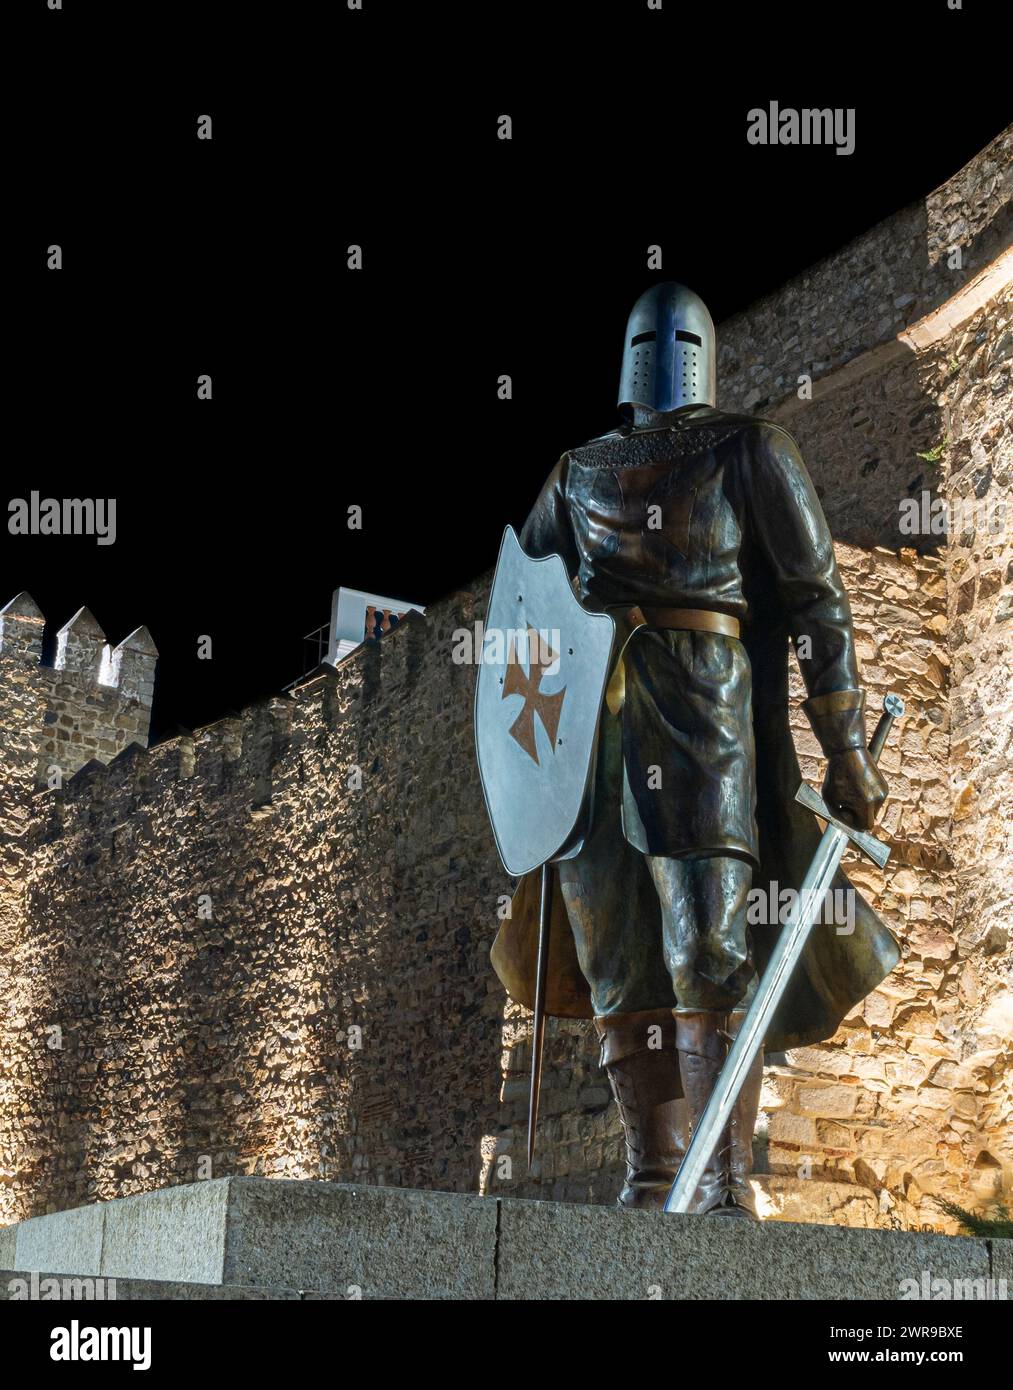 A statue of a warrior with two swords and a helmet in front of a stone wall Stock Photo